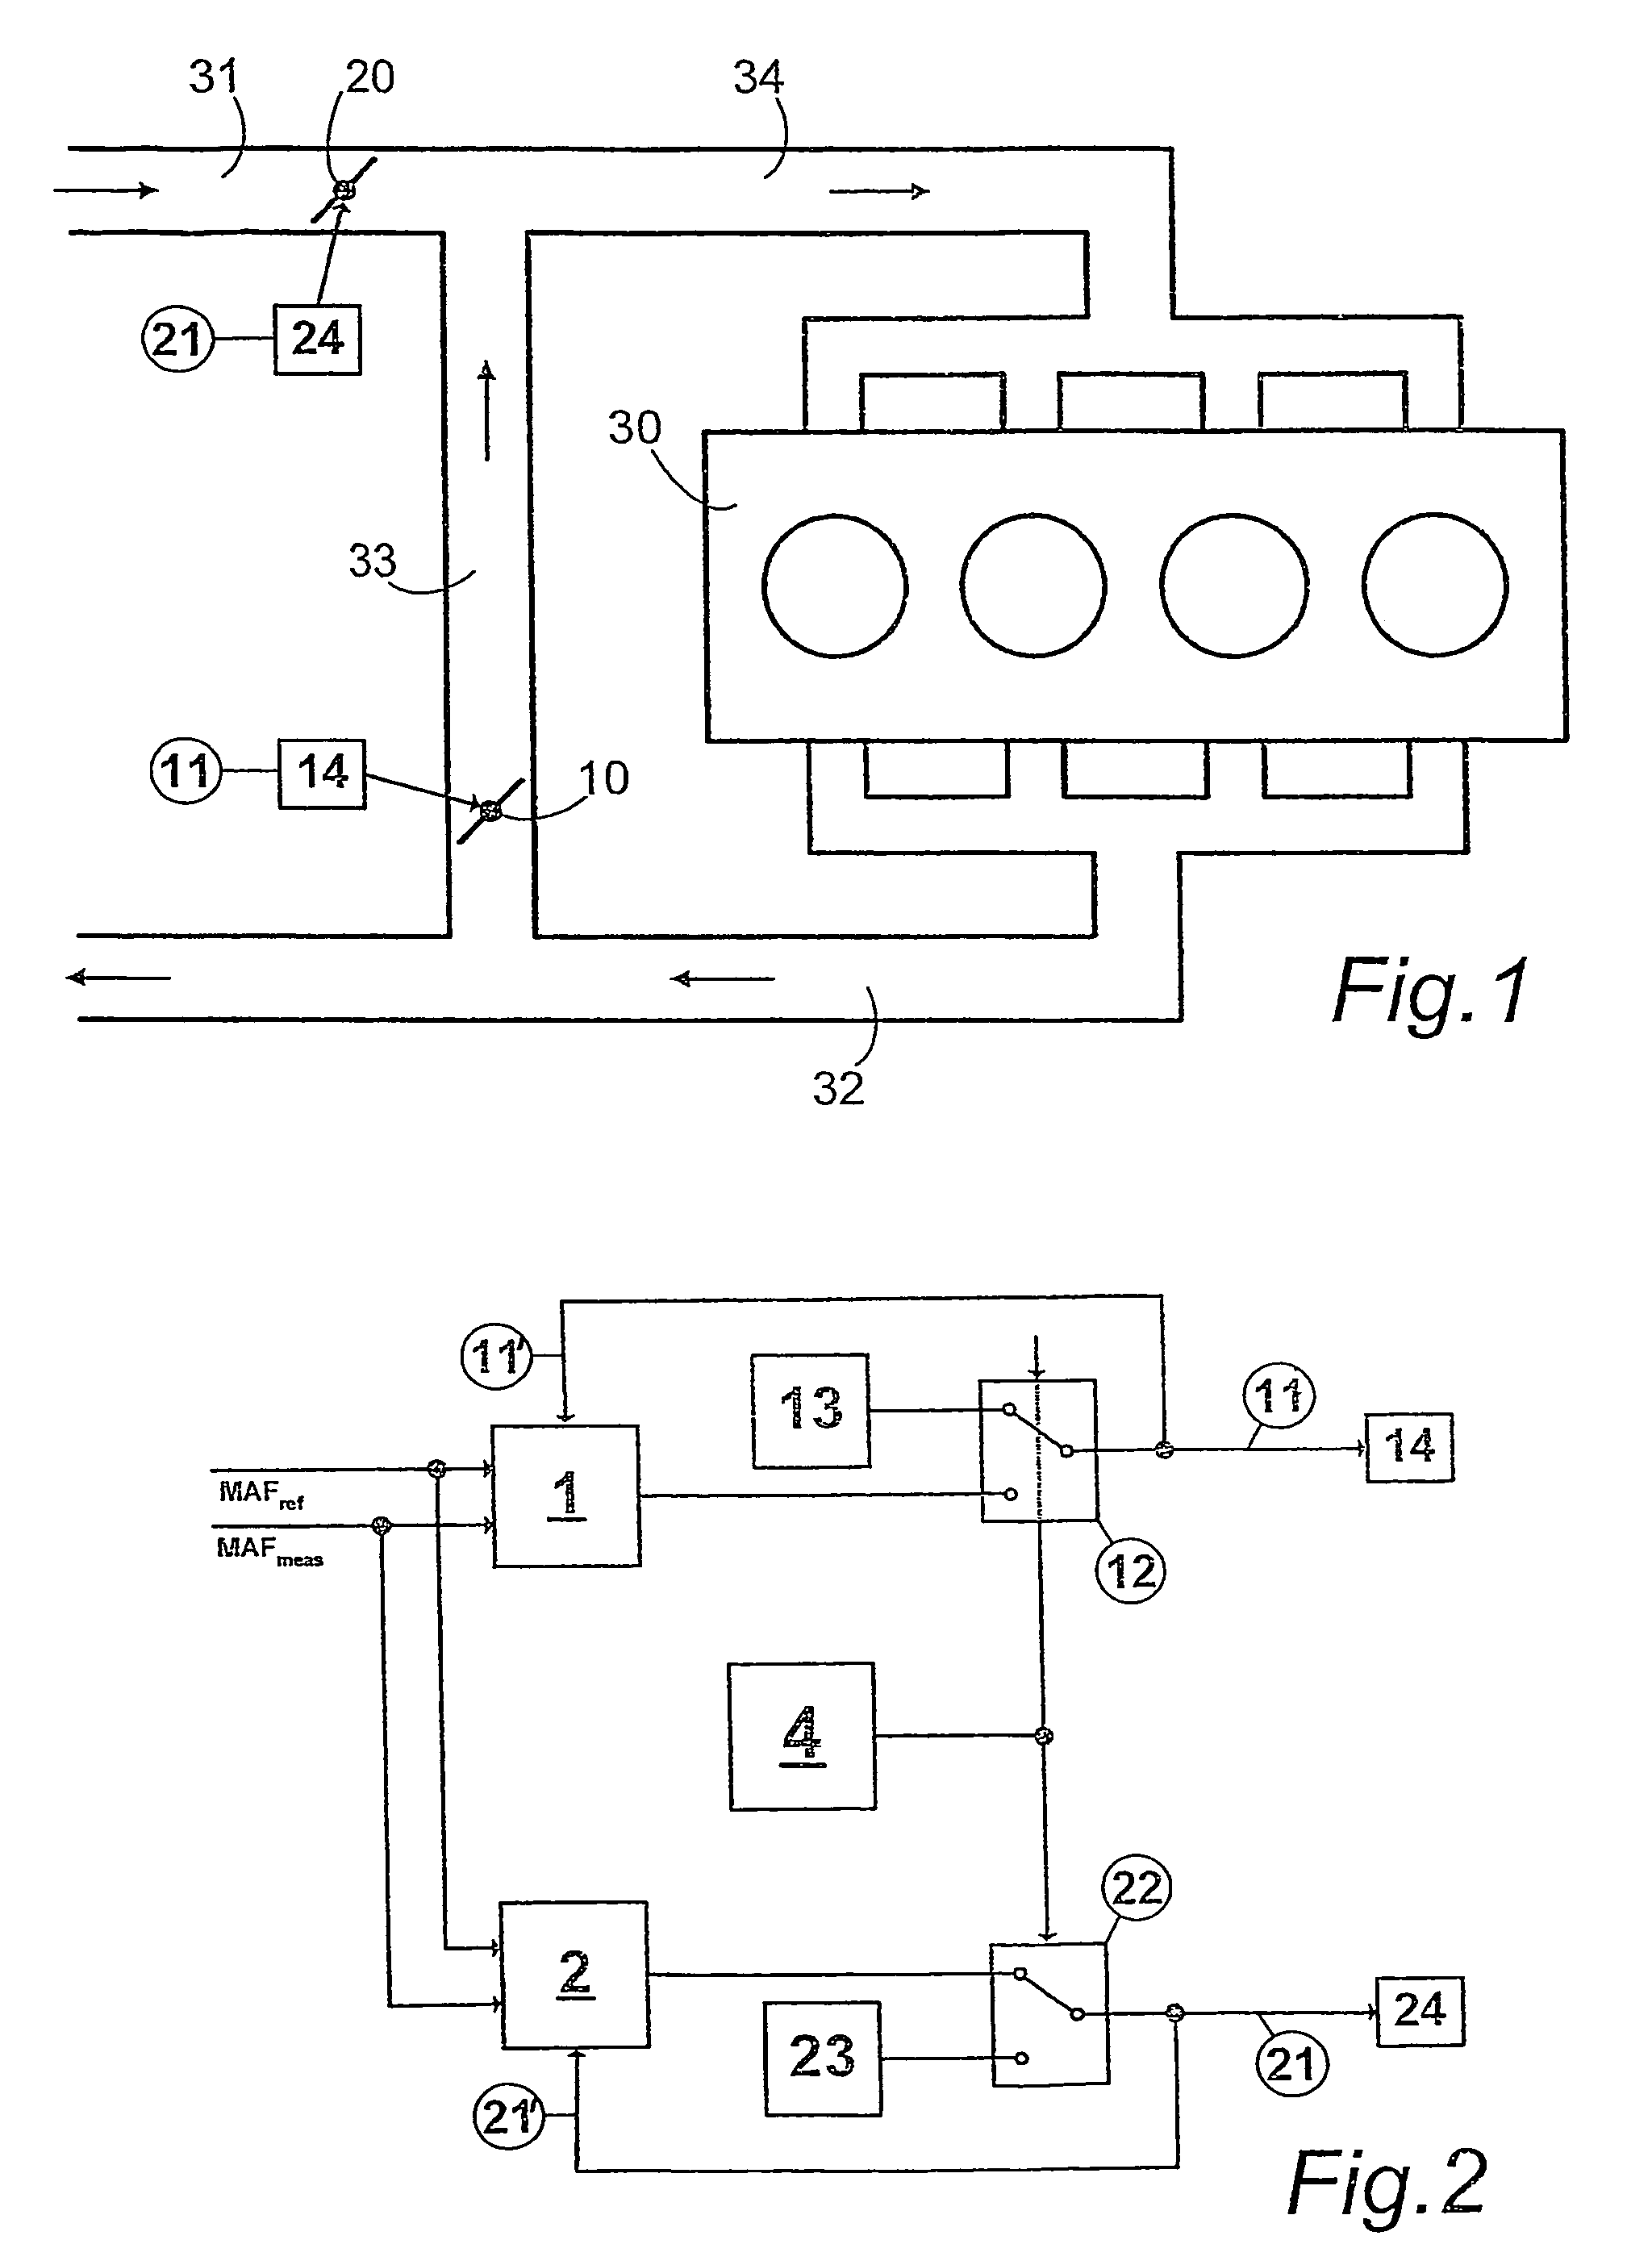 Method for controlling the air system in an internal combustion engine